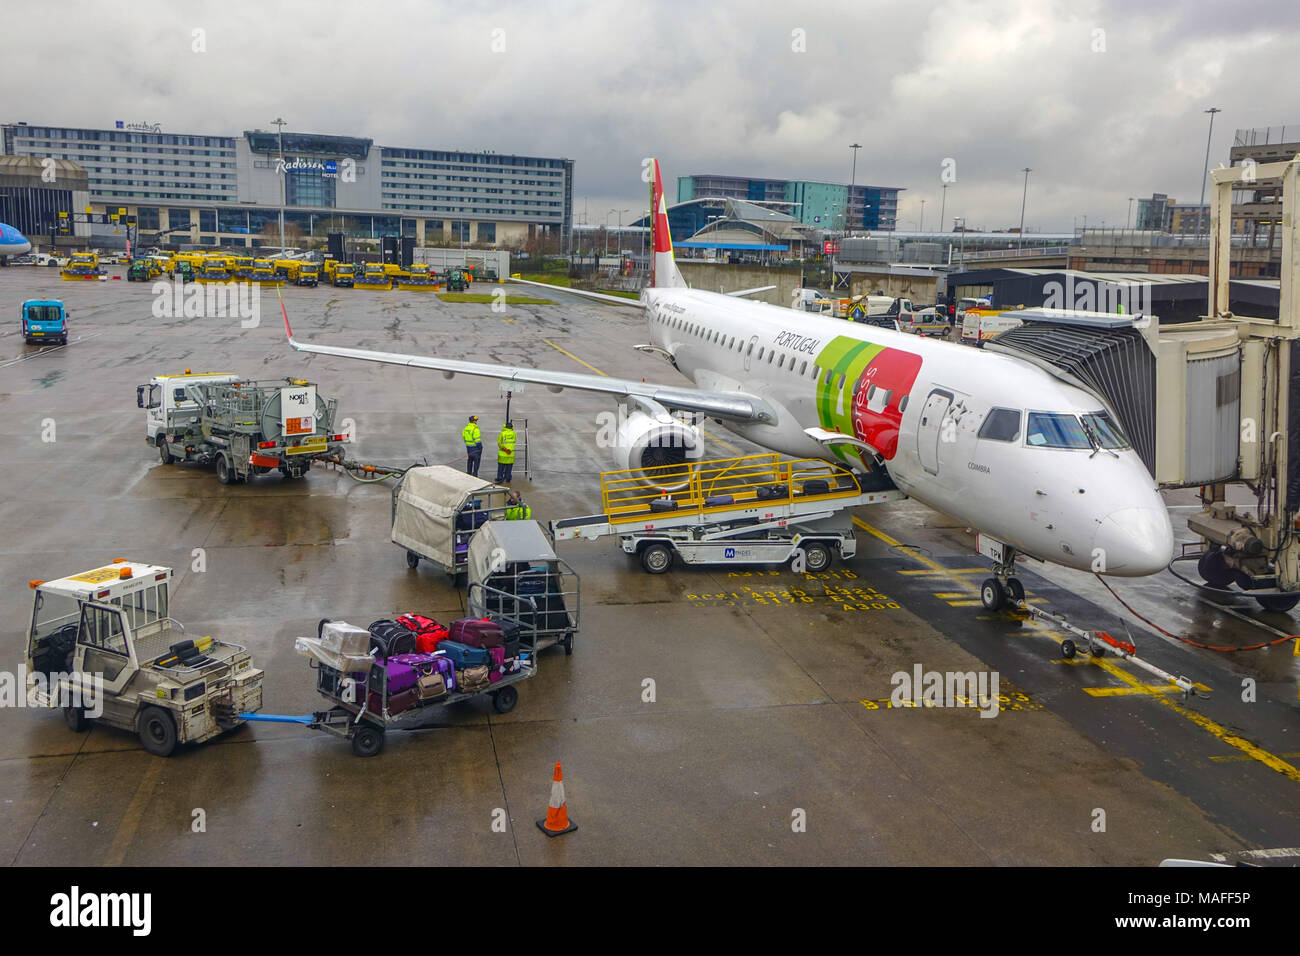 Loading TAP Portugal Aircraft at Manchester airport on wet day Stock Photo